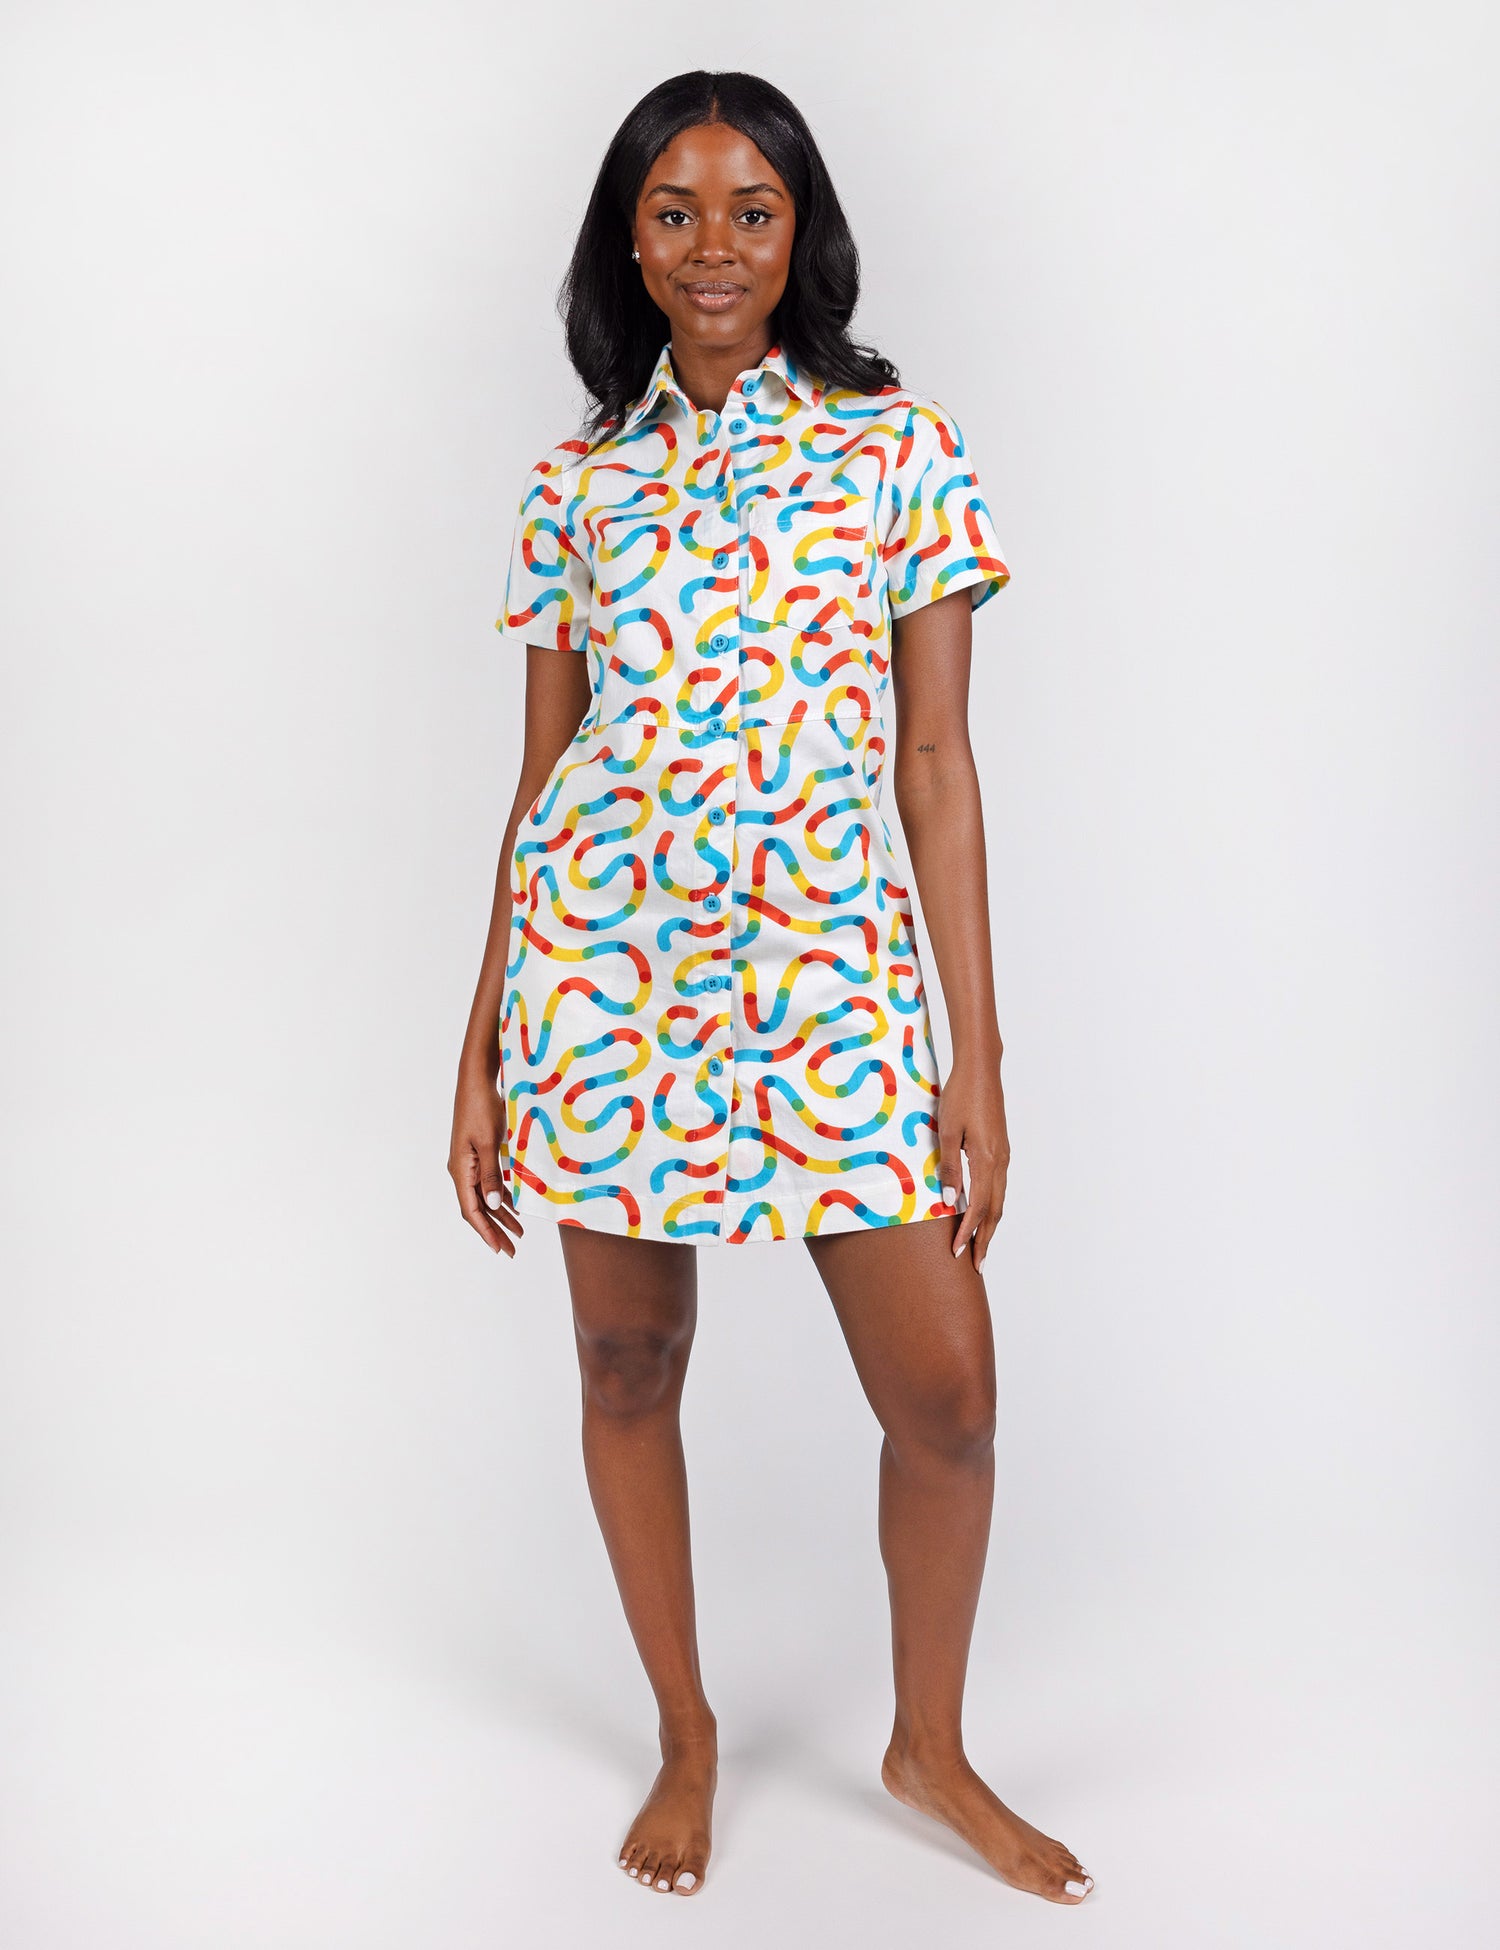 woman wearing a white button up dress with colorful squiggle designs